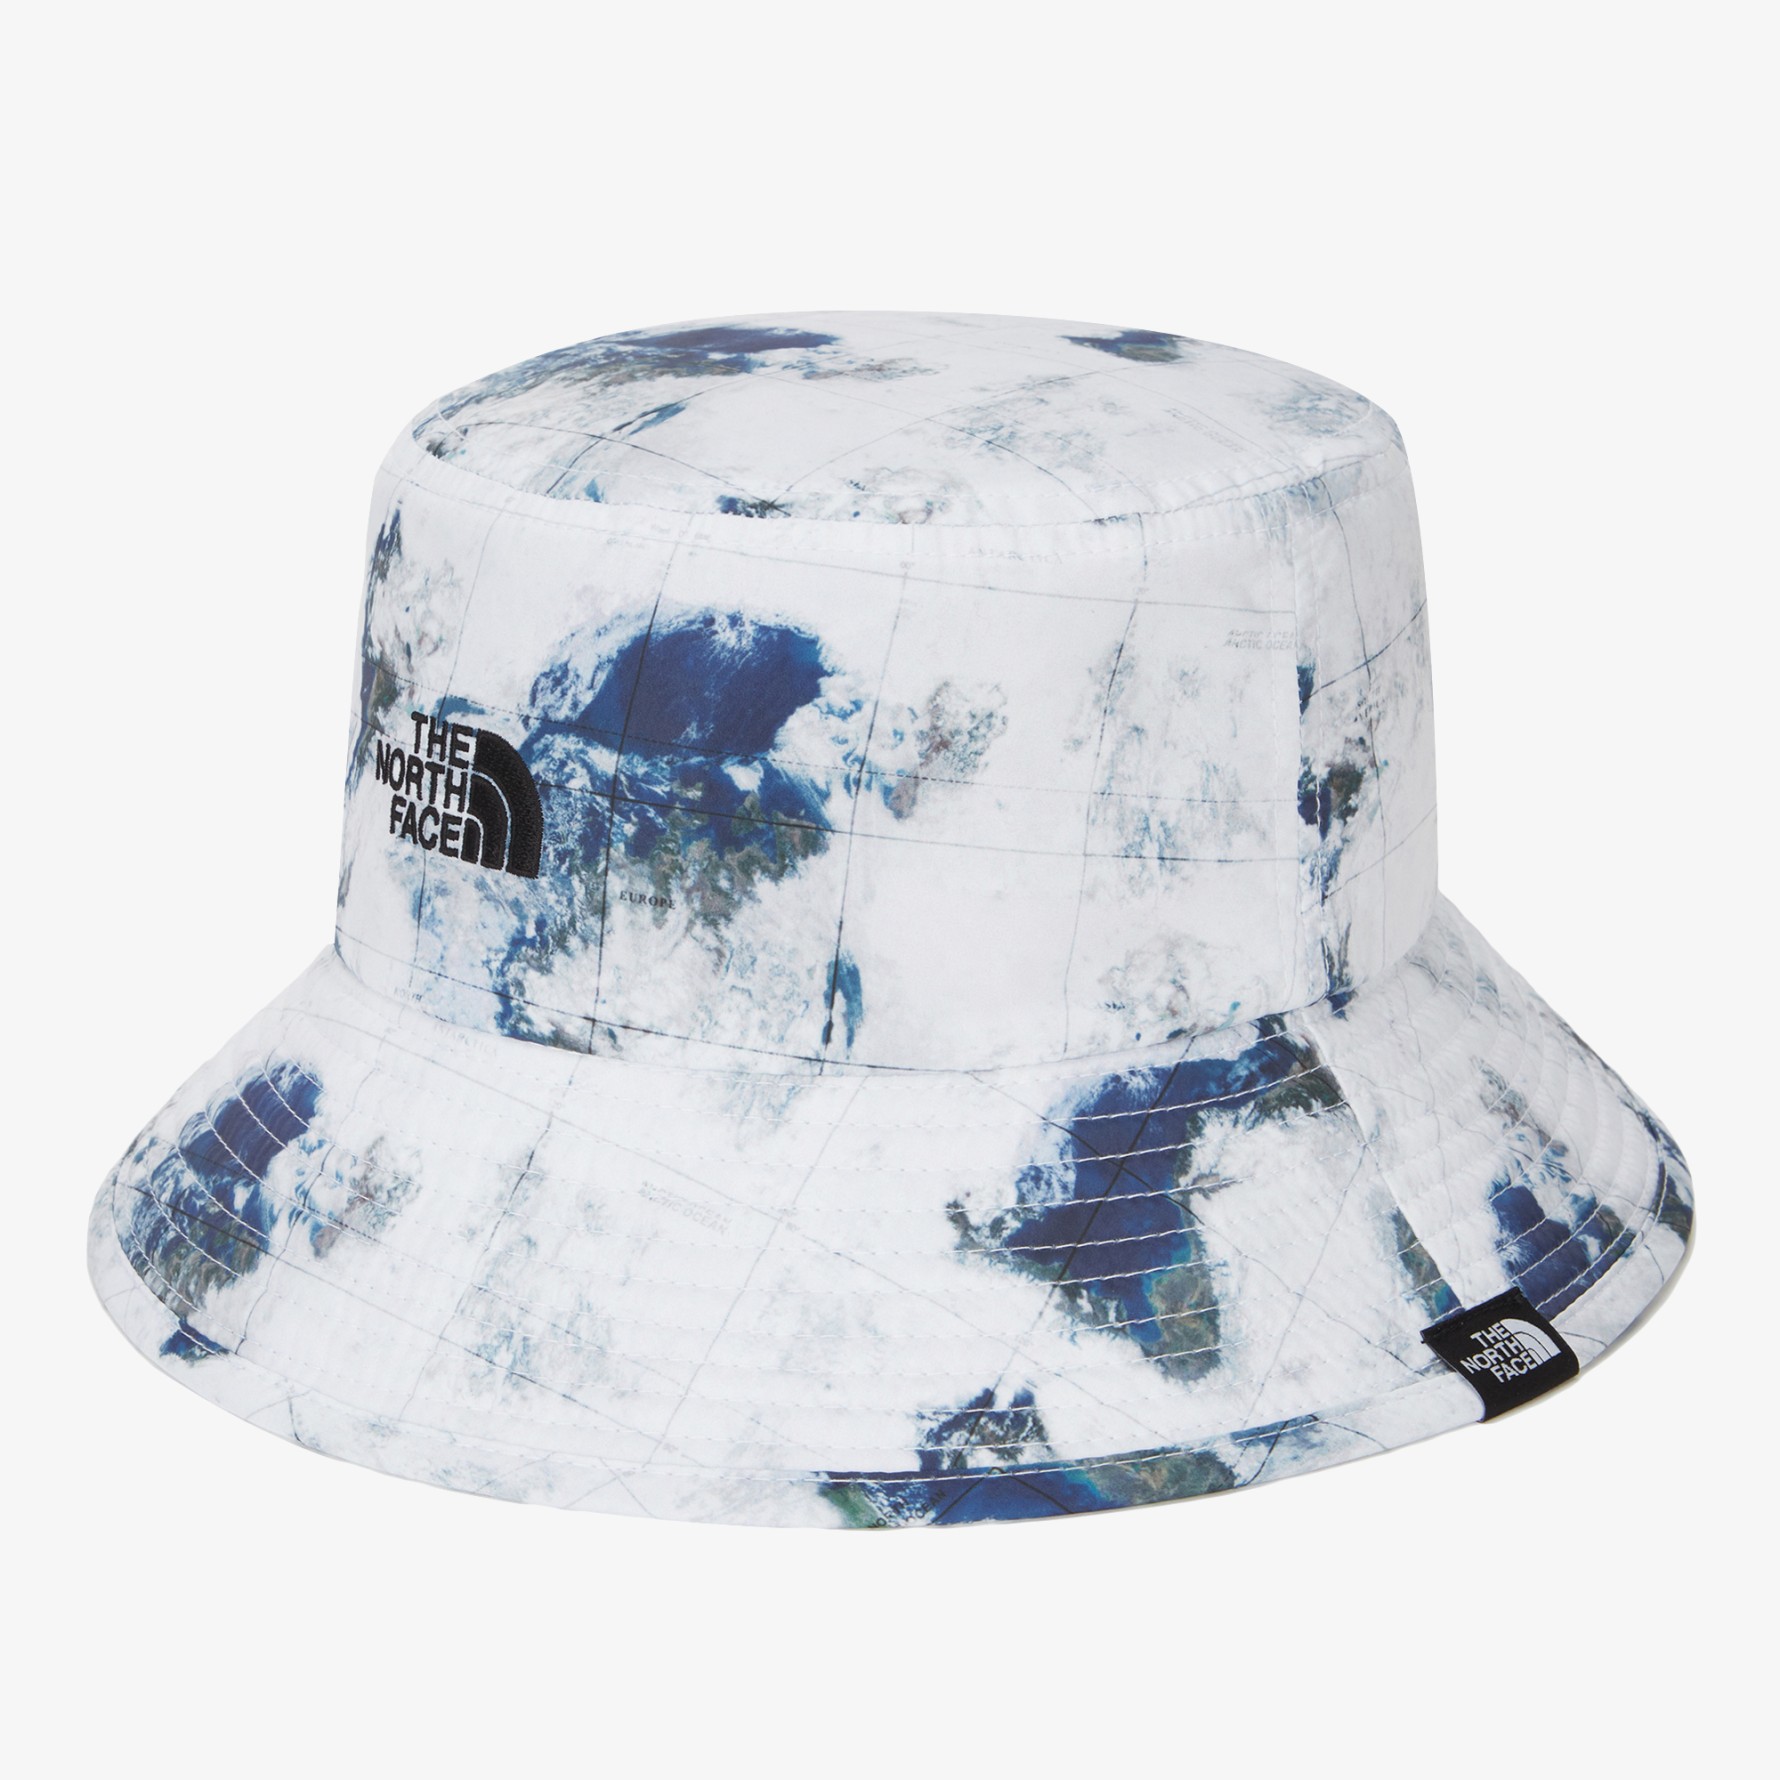 THE NORTH FACE - ECO BUCKET HAT (GRAY)